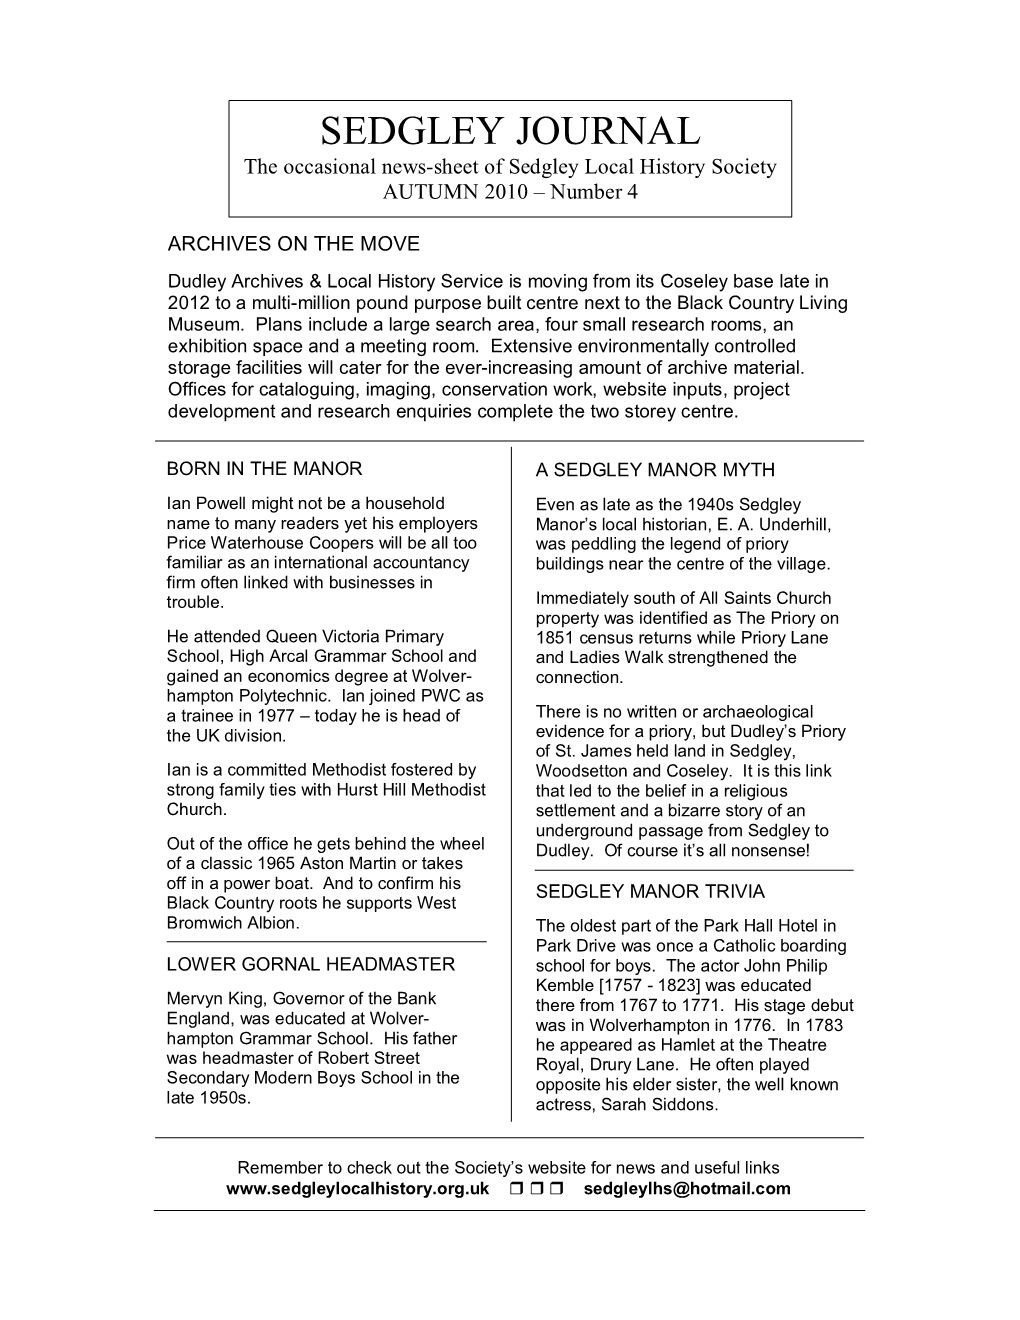 SEDGLEY JOURNAL the Occasional News-Sheet of Sedgley Local History Society AUTUMN 2010 – Number 4